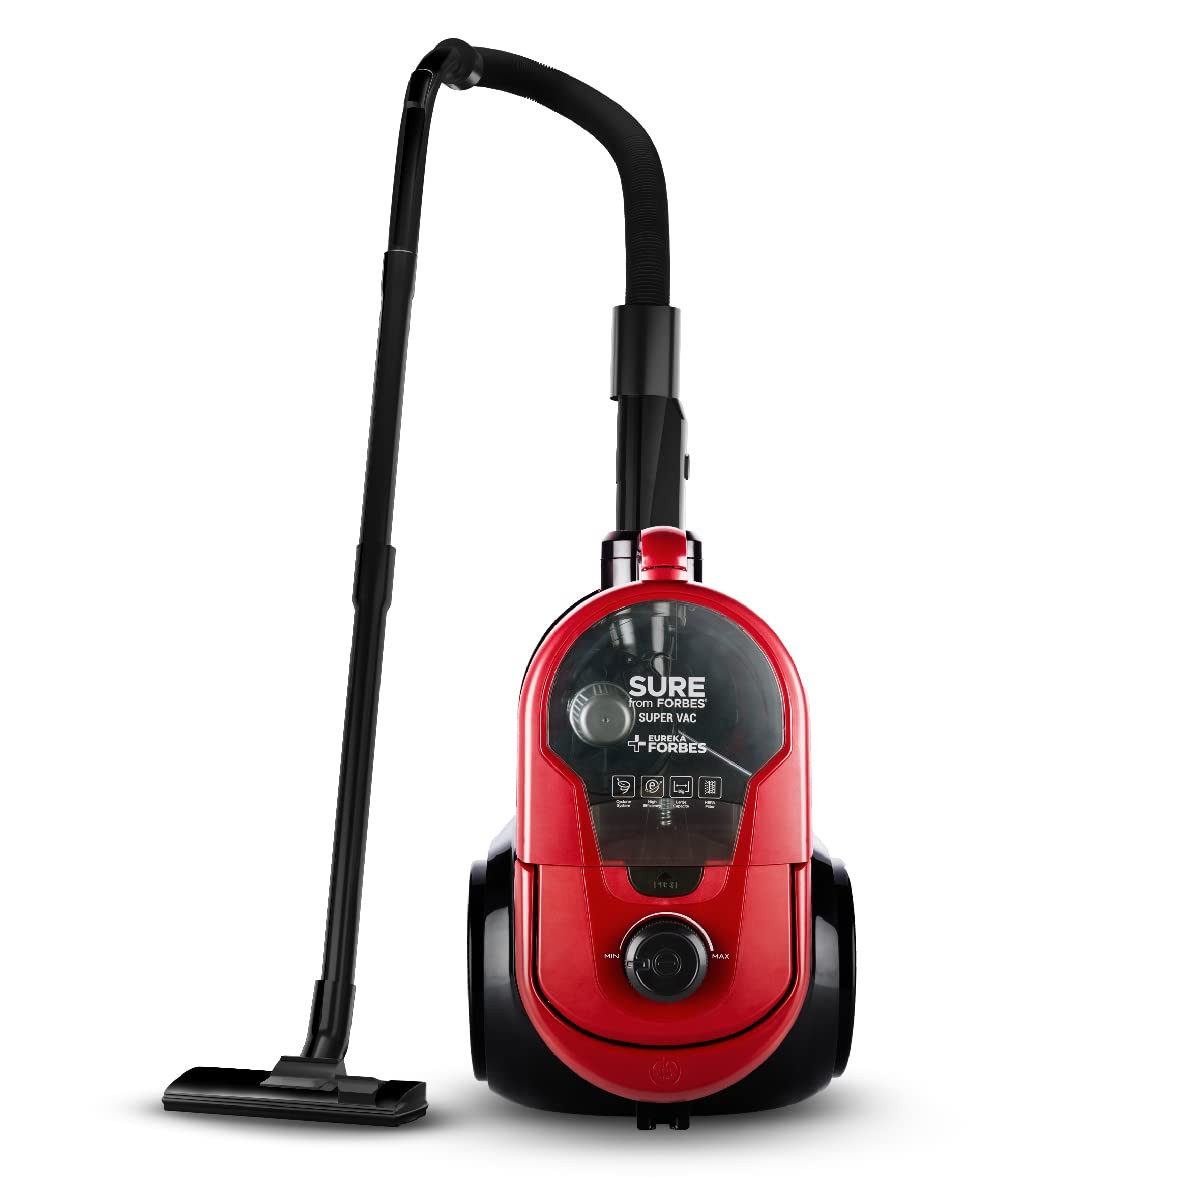 Eureka Forbes Supervac 1600 Watts Powerful Suctionbagless Vacuum Cleaner with cyclonic Technology7 Accessories1 Year WarrantyCompactLightweight  Easy to use Red